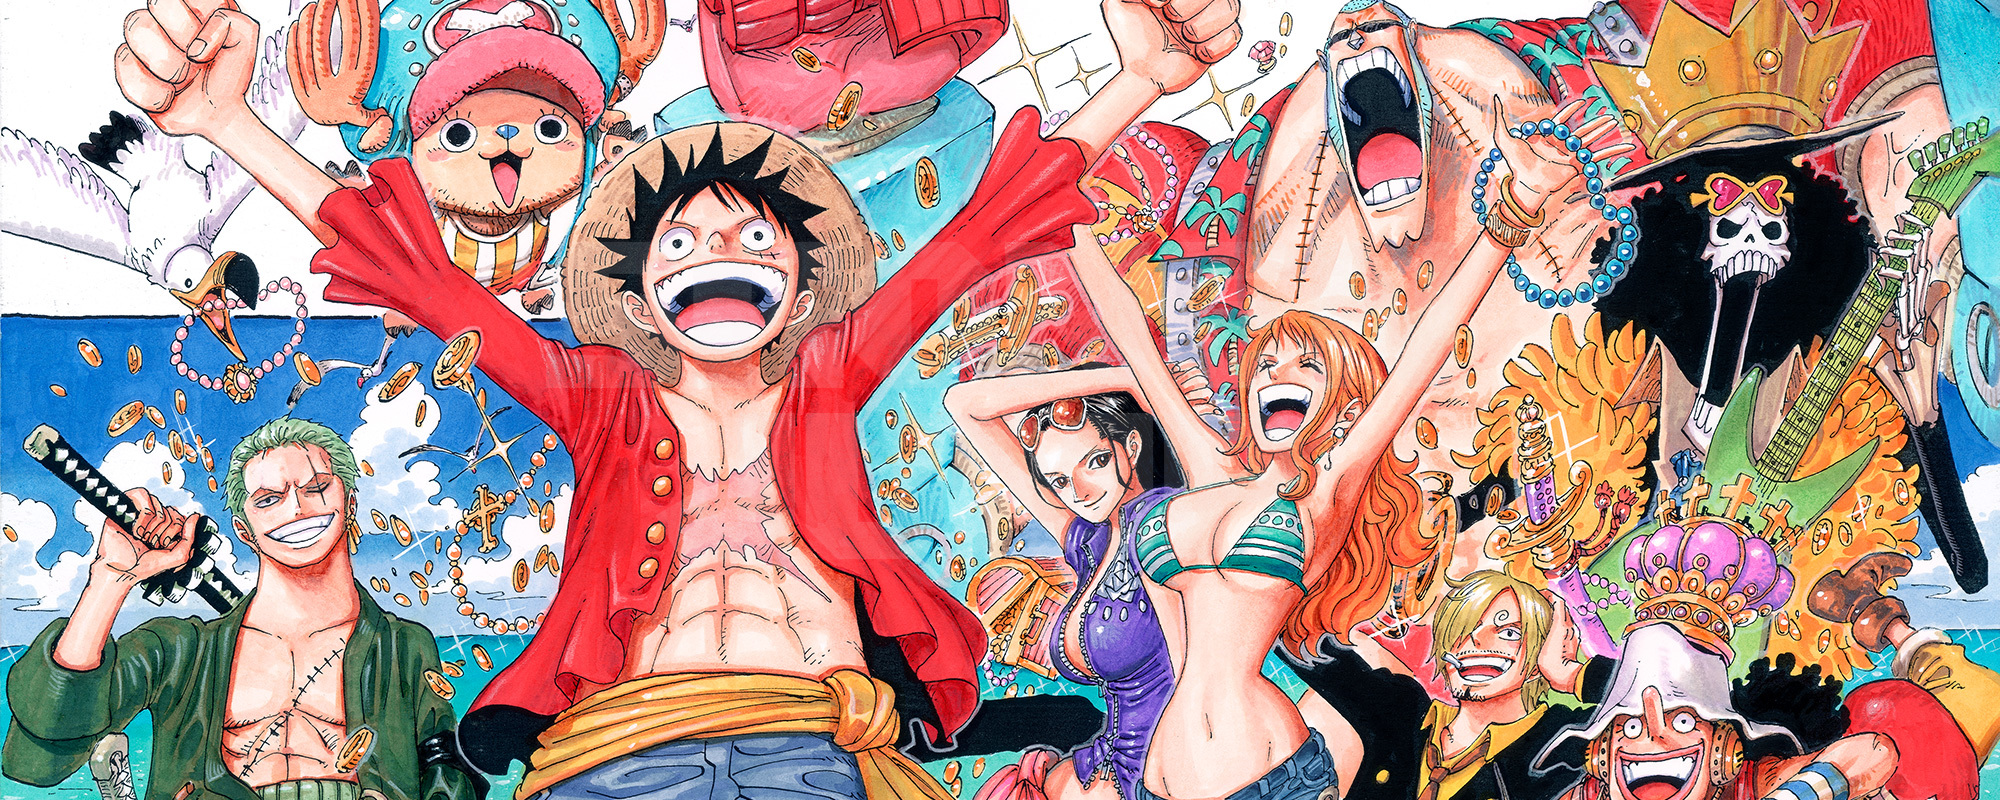 Here's When One Piece Anime's Egghead Arc Will Begin, Episode